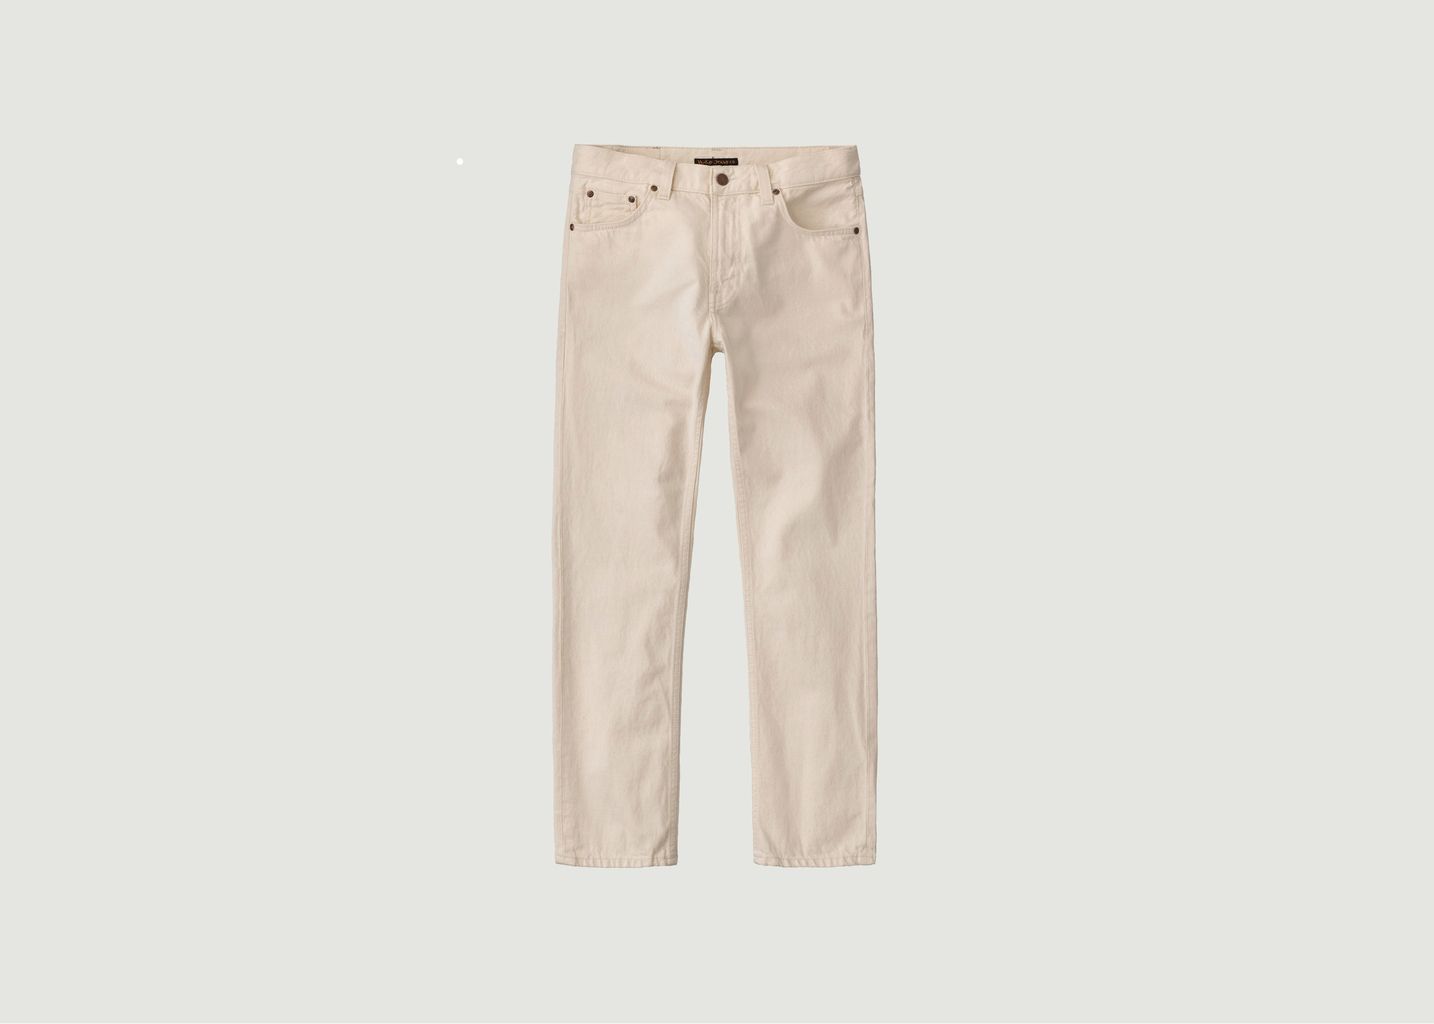 Nudie Jeans Gritty Jackson Organic Cotton Jeans